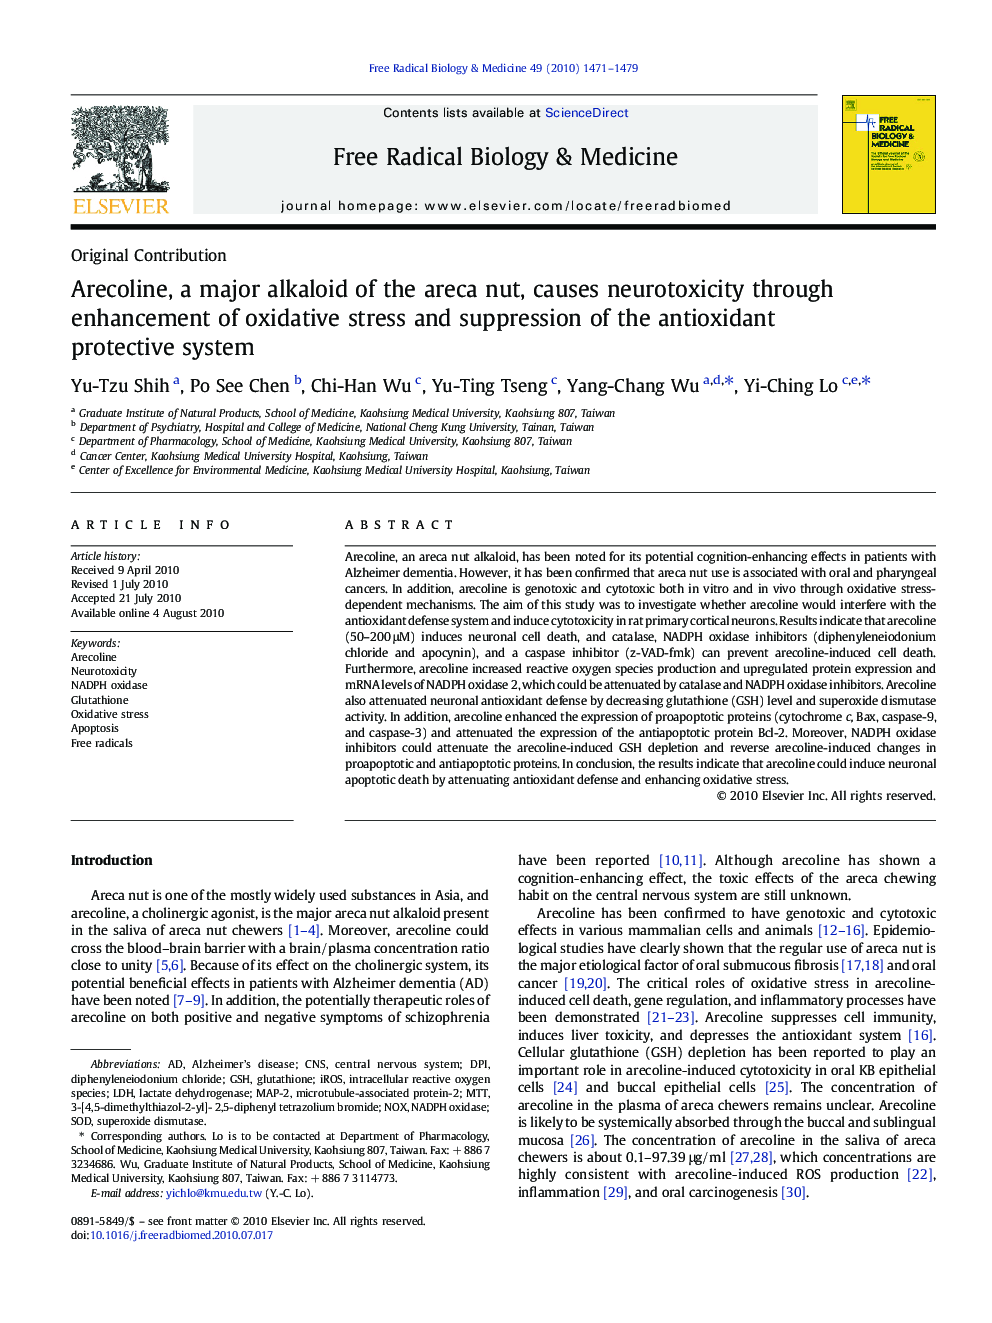 Arecoline, a major alkaloid of the areca nut, causes neurotoxicity through enhancement of oxidative stress and suppression of the antioxidant protective system